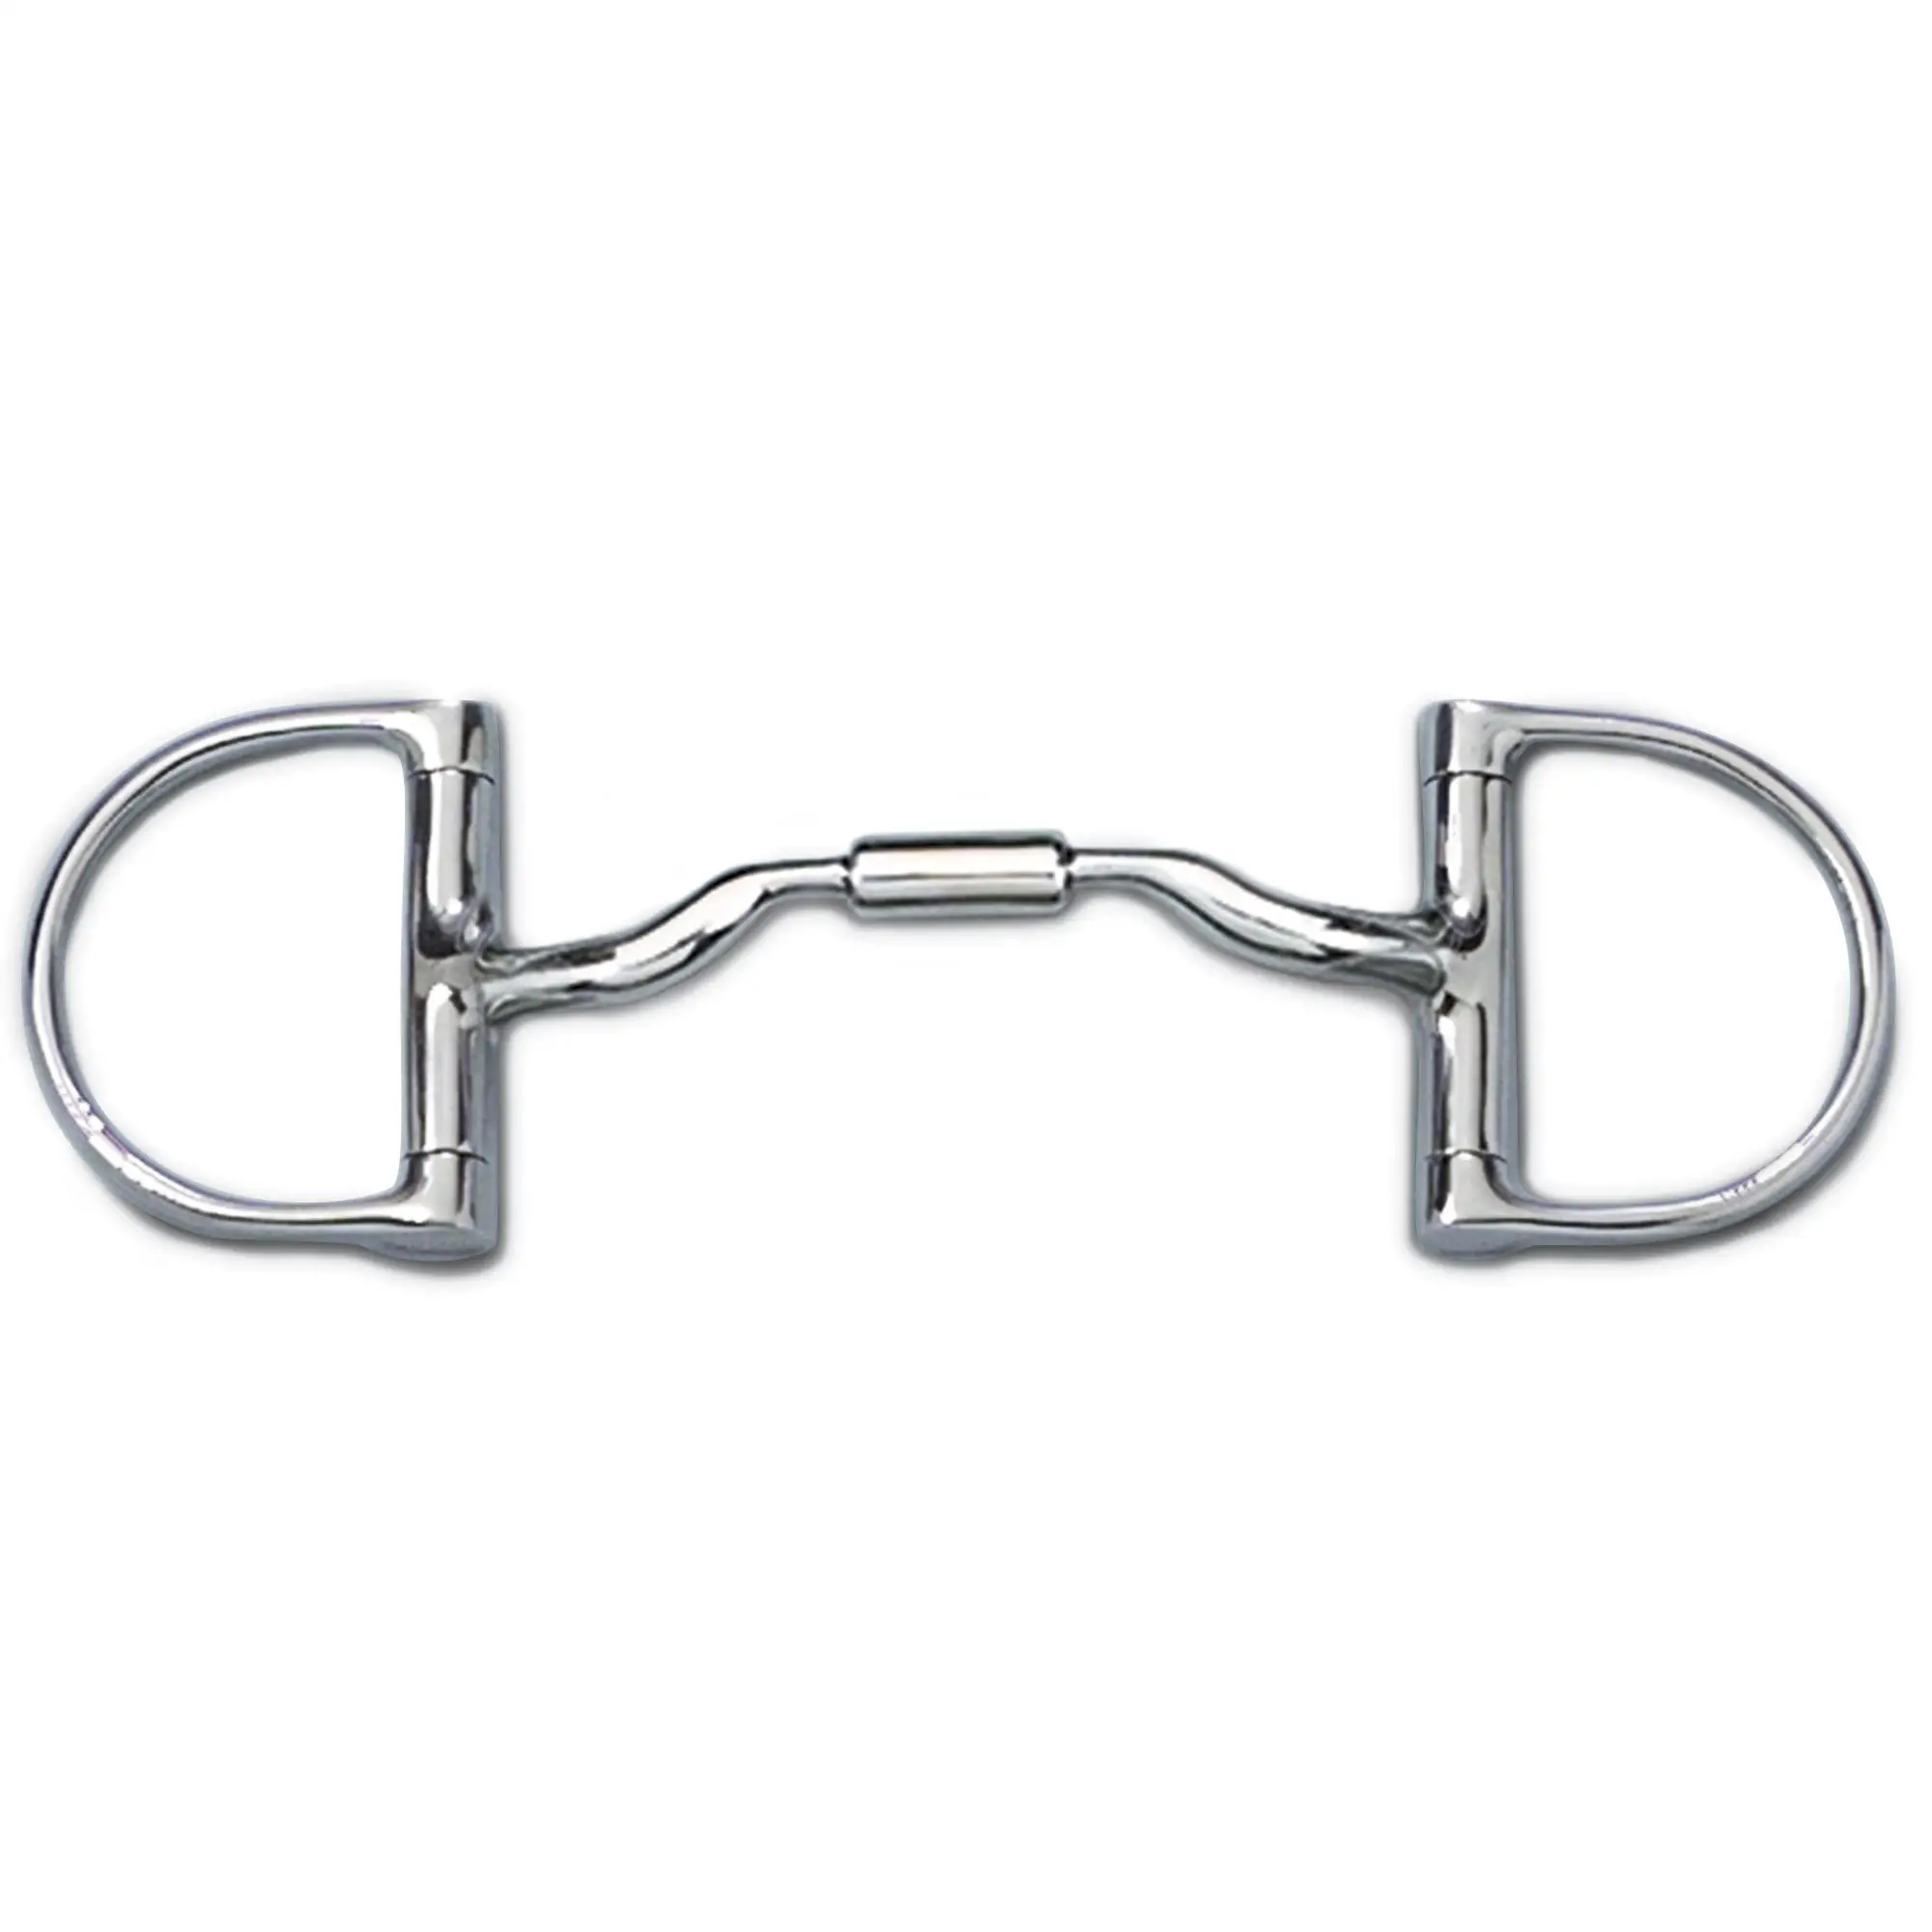 Medium English Dee Low Port Comfort Snaffle horse riding products equestrian horse mouth bits with chrome rings by human tools